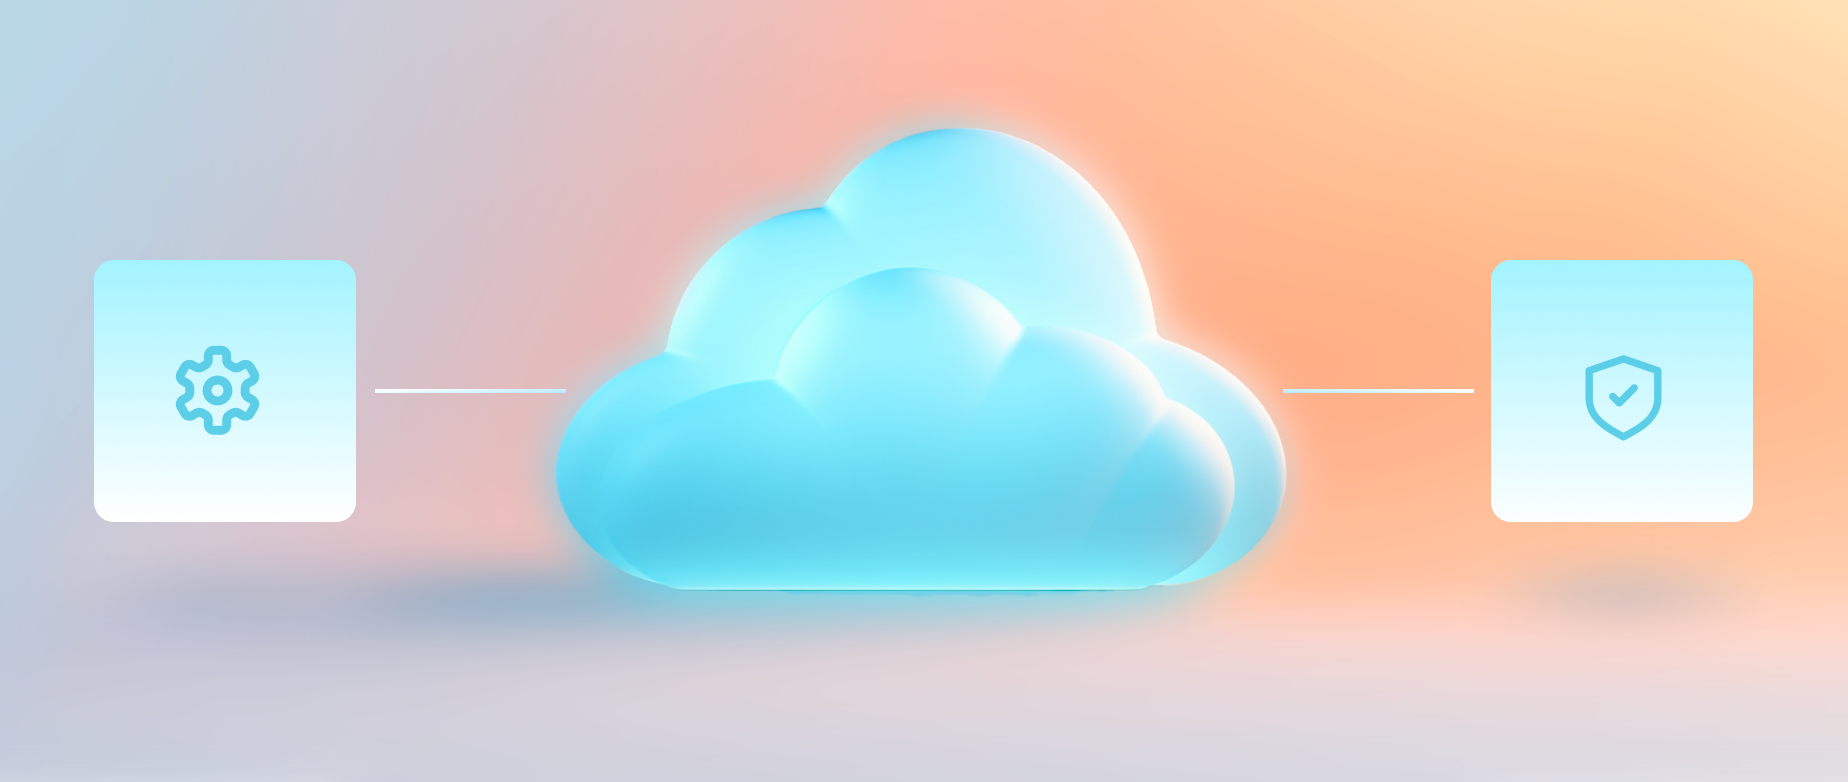 a cloud in the middle of two icons symbolizing saas ecommerce